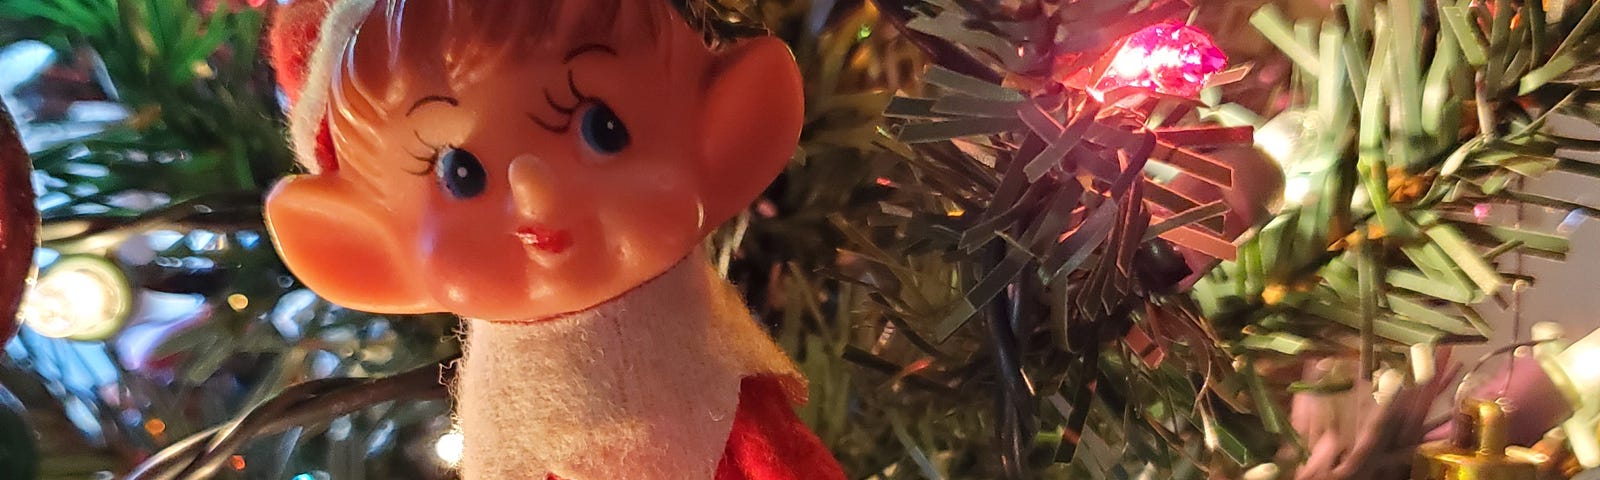 Elf in a lit Christmas tree